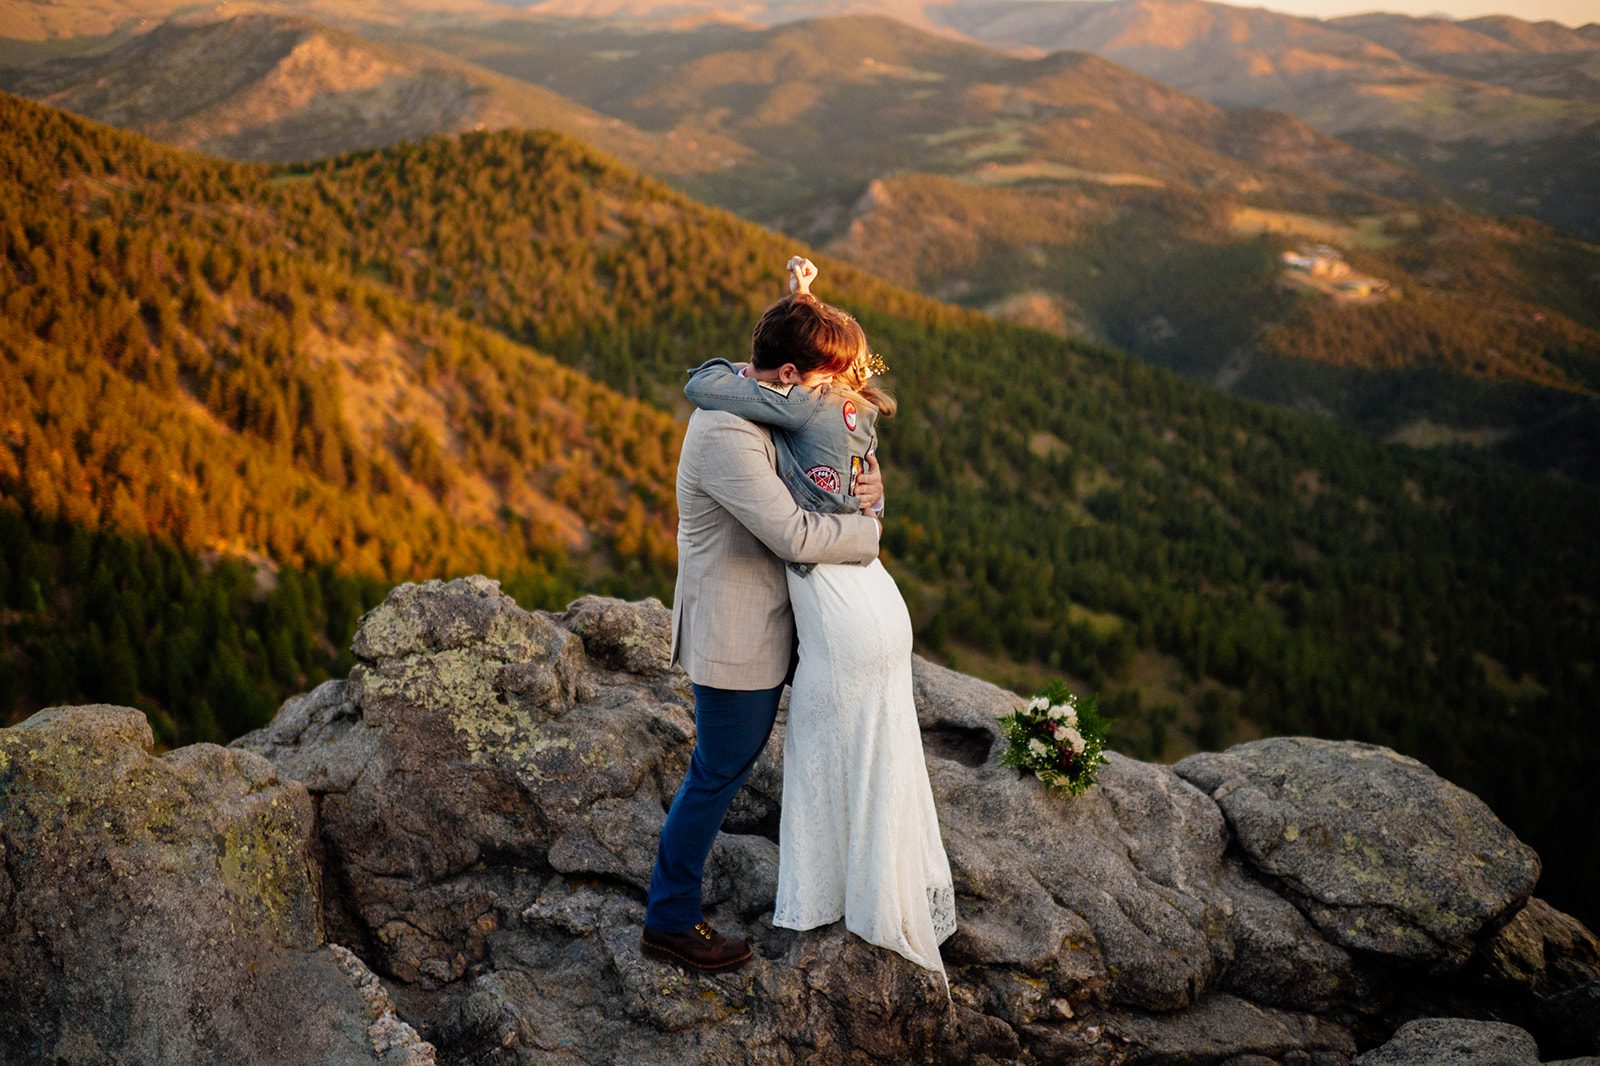 bride and groom hug after becoming official after their sunrise elopement ceremony at Lost Gulch Overlook.